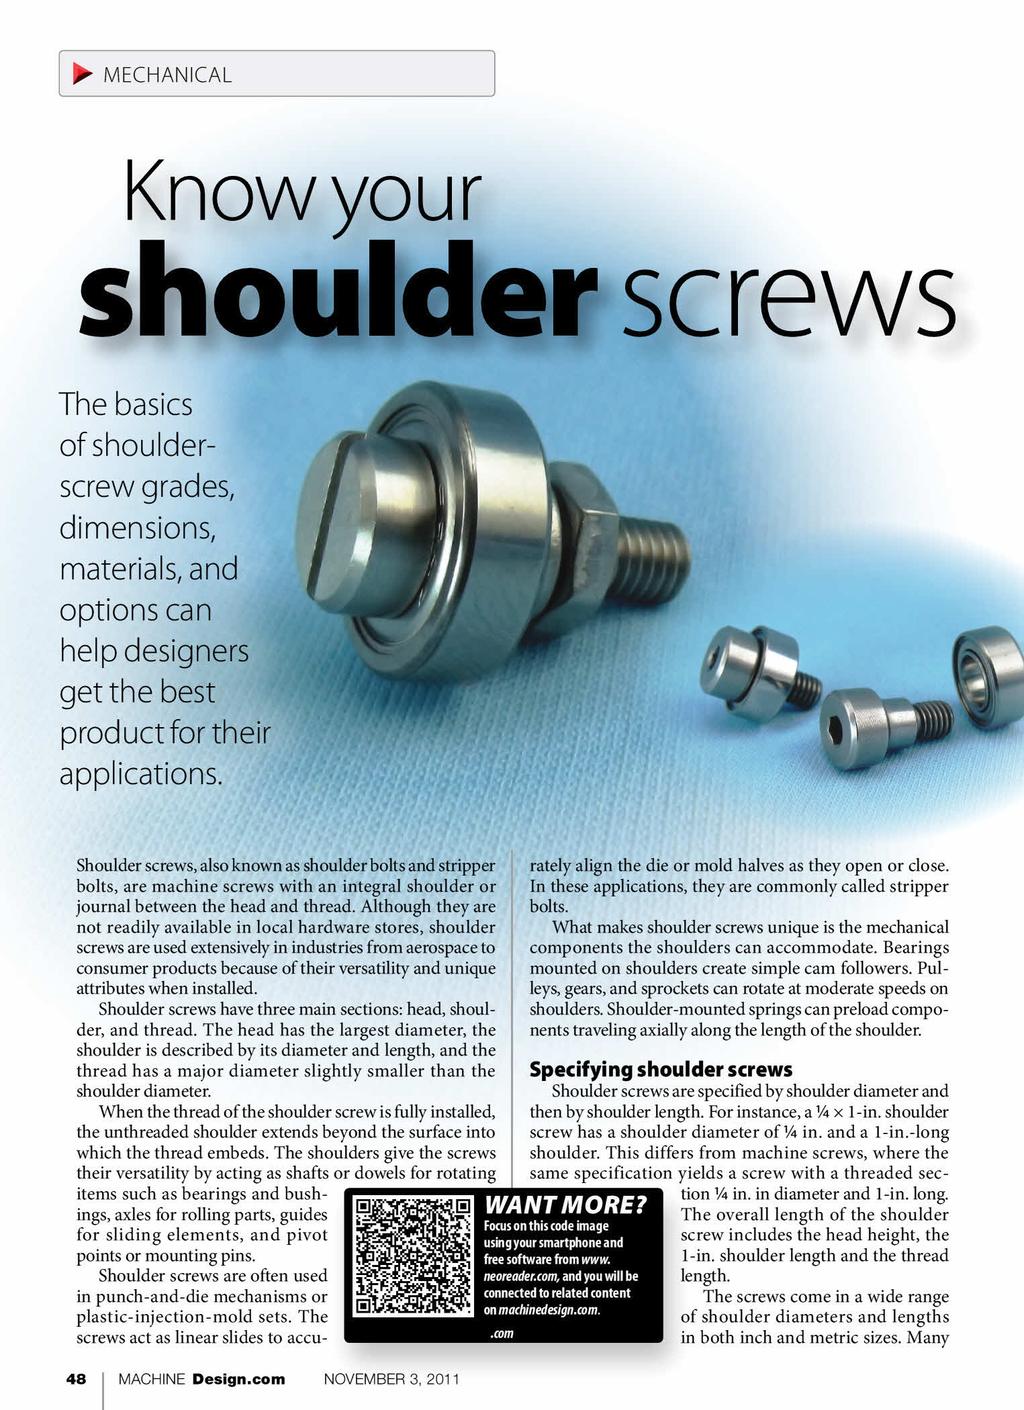 MECHANICAL Know your shoulder screws The basics of shoulderscrew grades, dimensions, materials, and options can help designers get the best proc uct for their appiications.